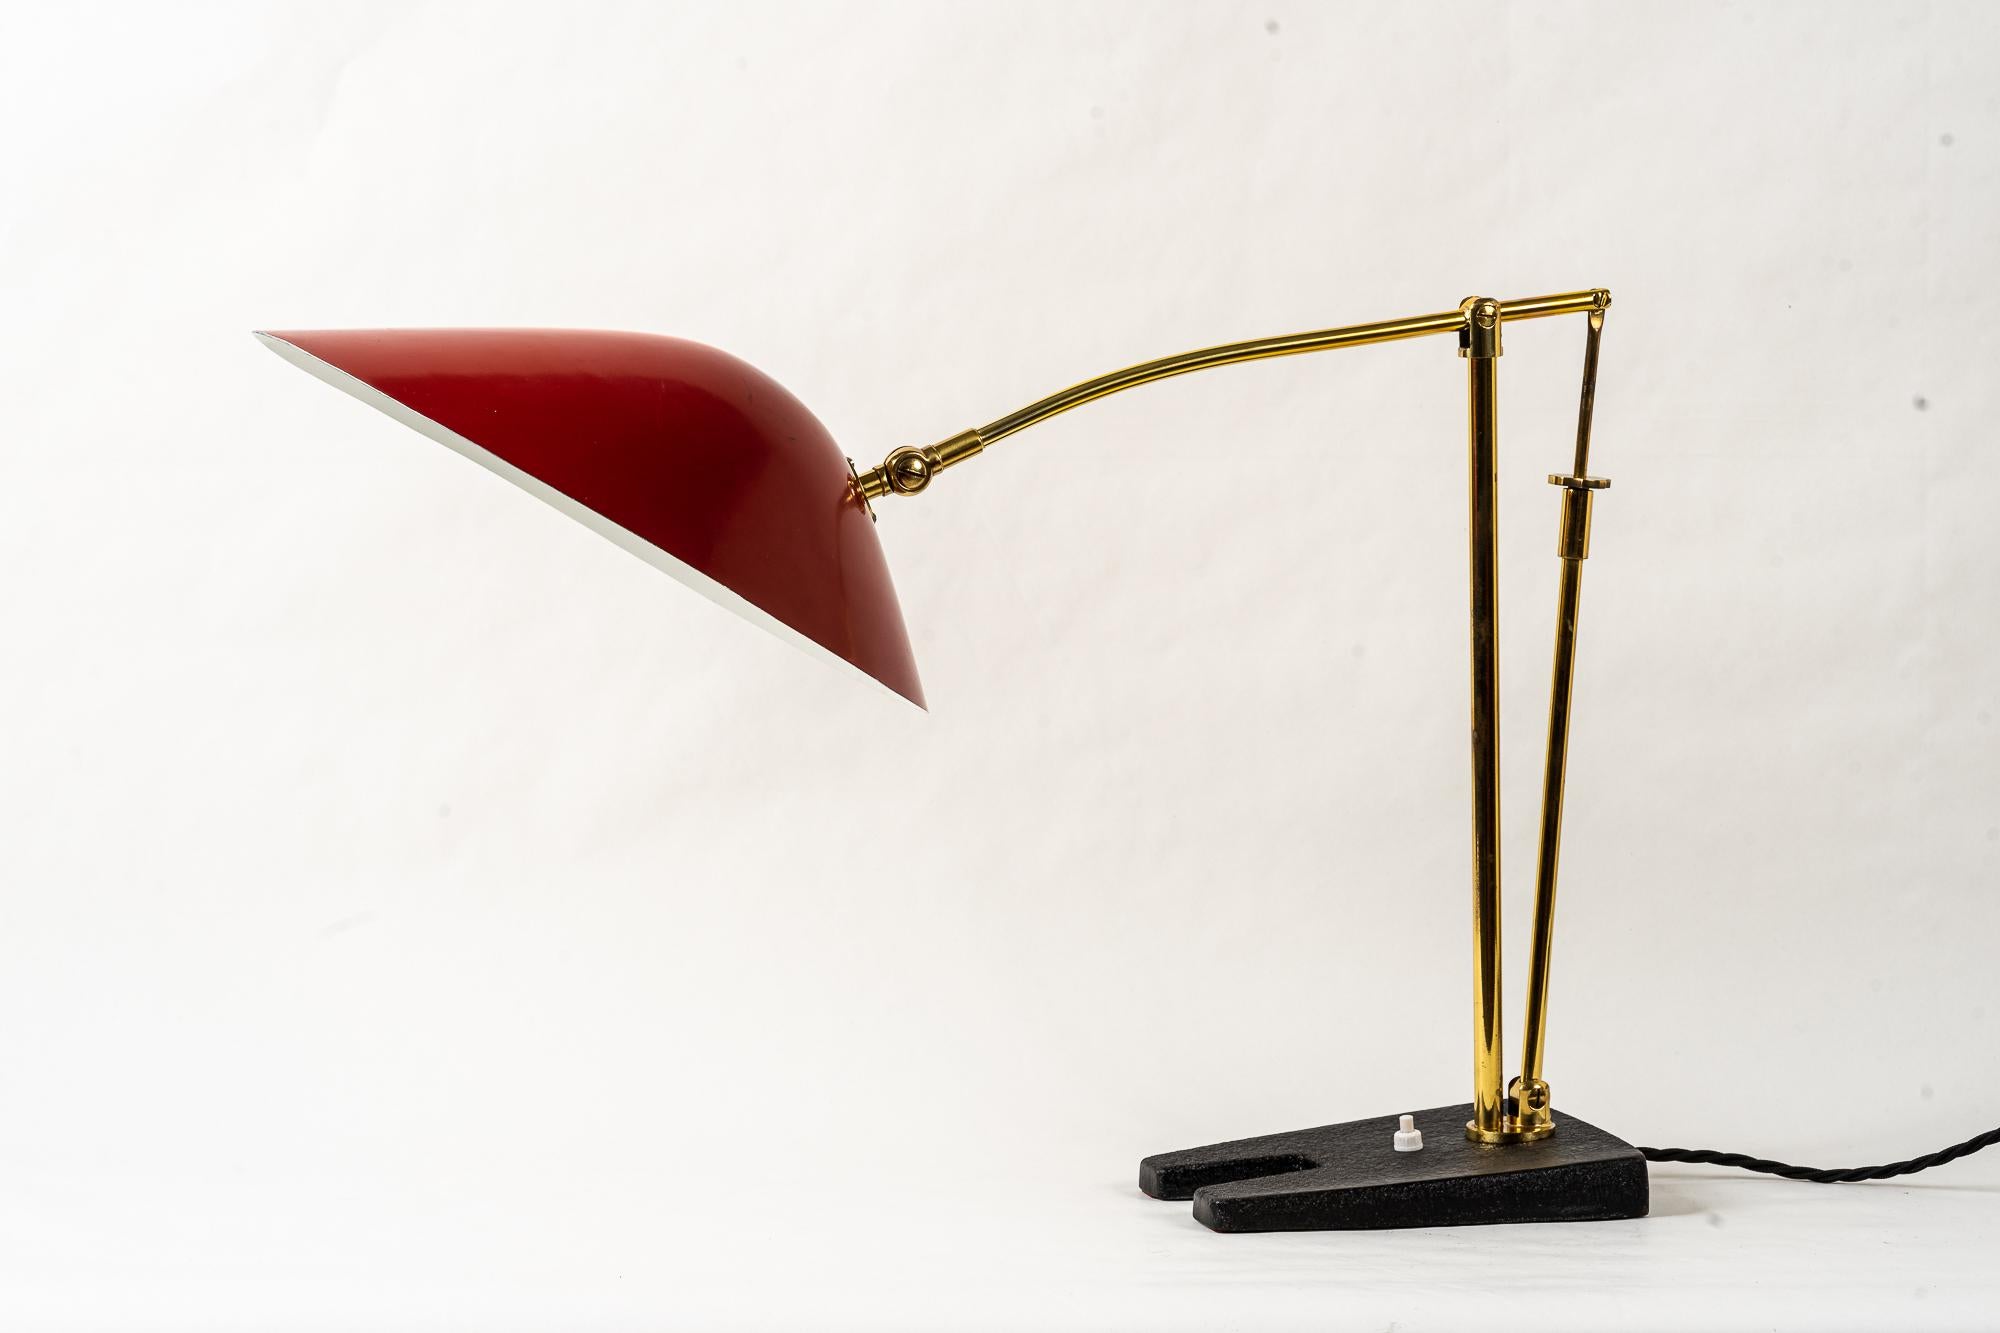 Rare adjustable Rupert Nikoll table lamp vienna around 1950s
Hight is adjustable in different positions 
the shade is adjustable separatly
Original condition.